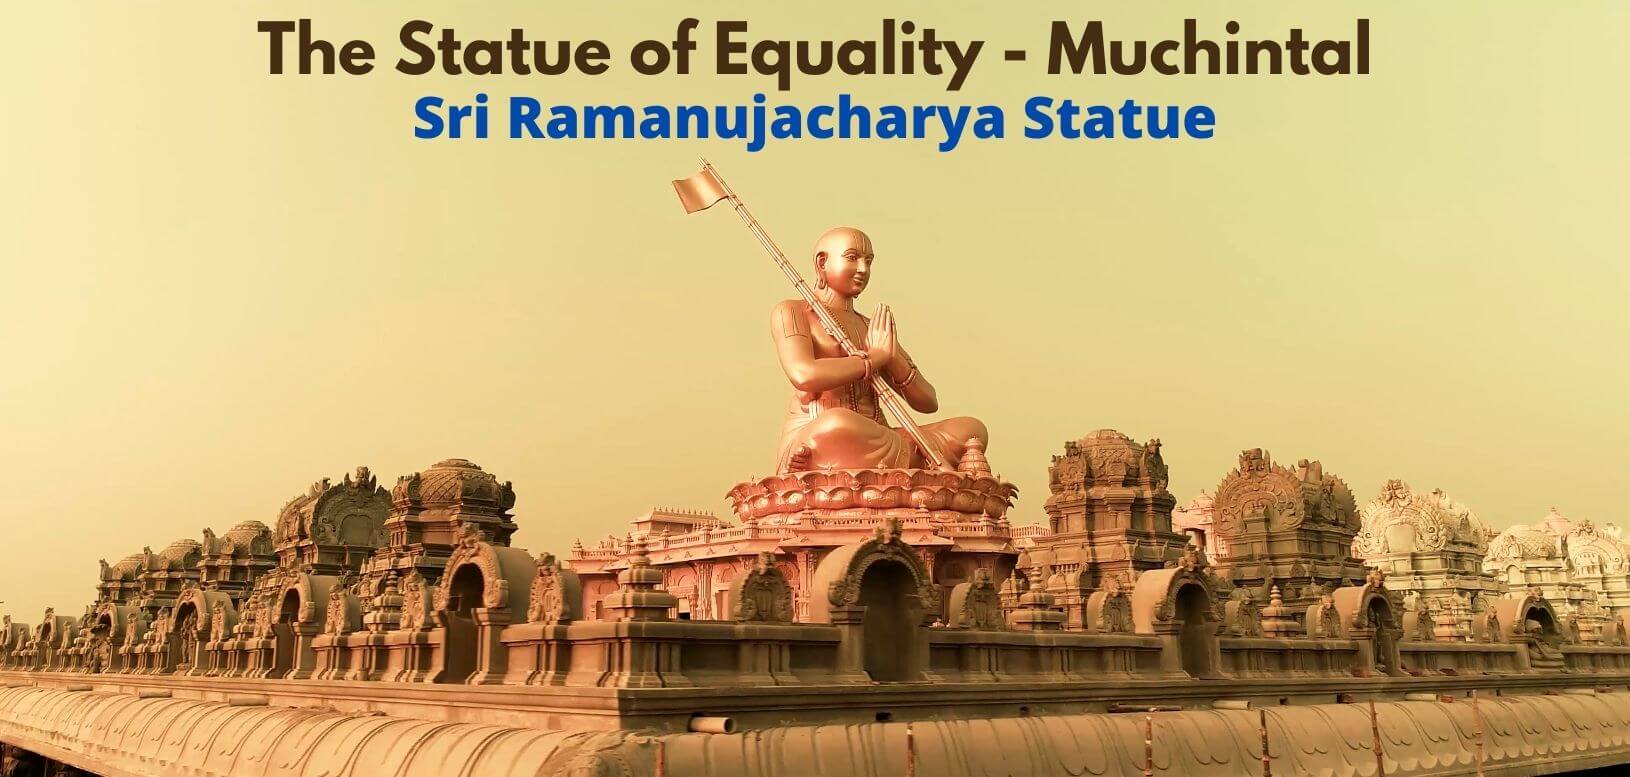 The Statue of Equality - Muchintal